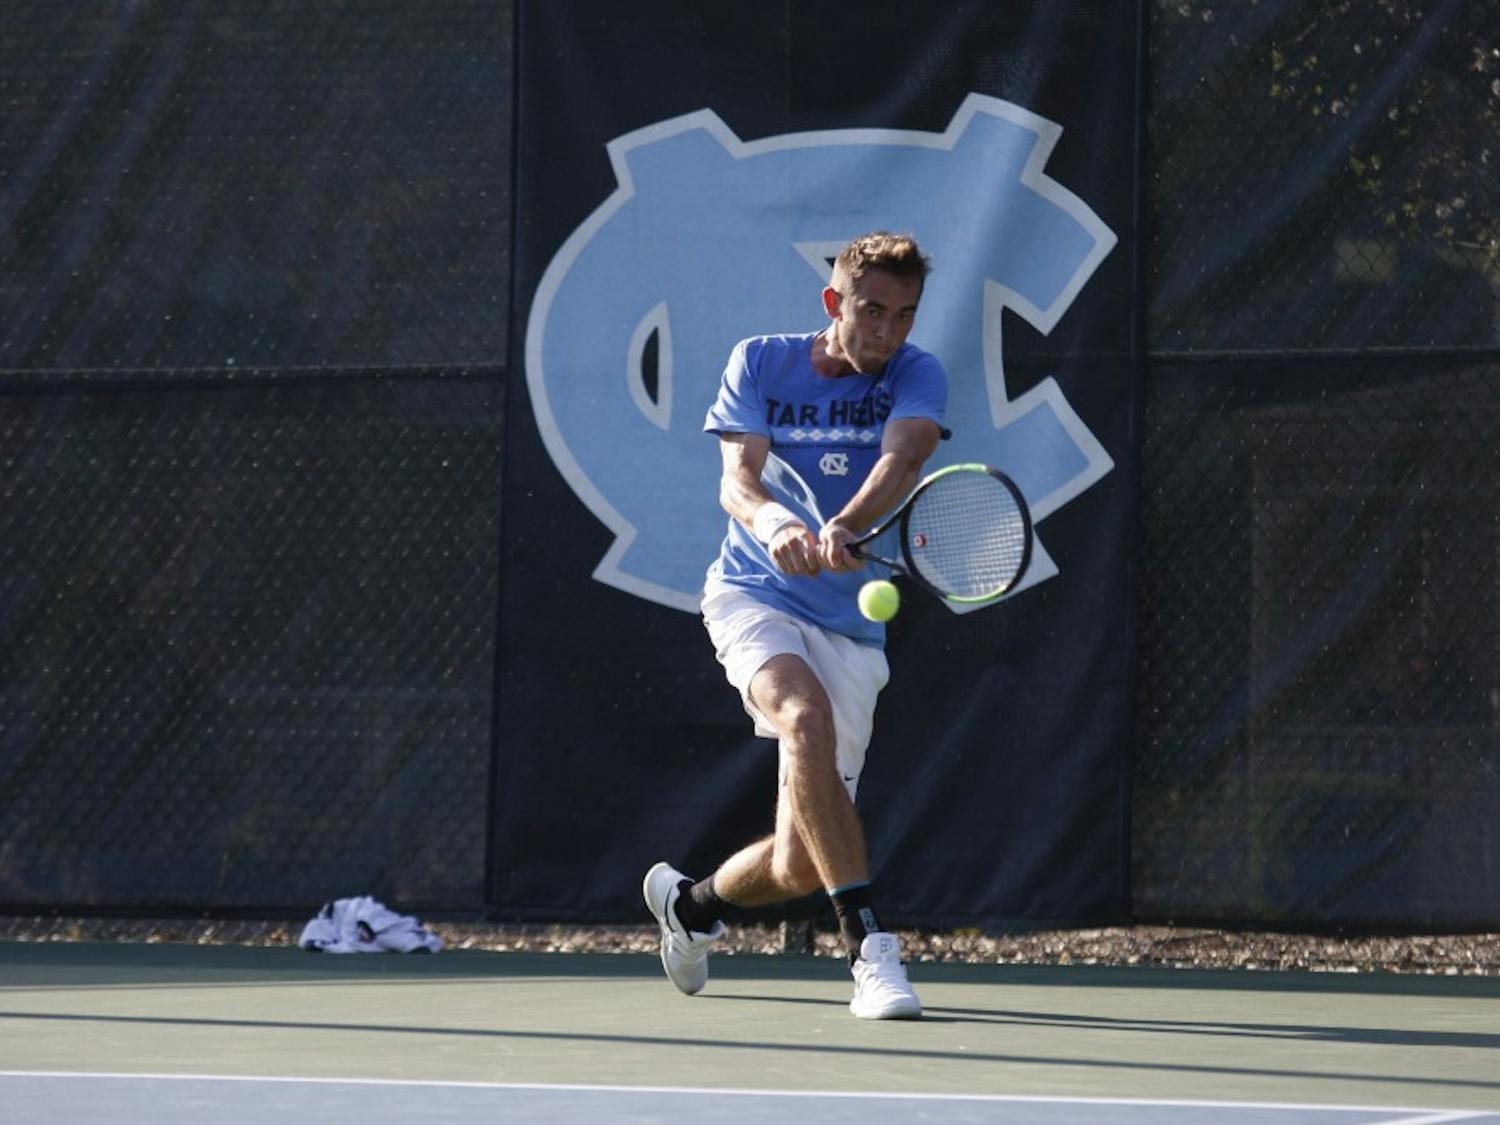 UNC men's tennis sophomore Benjamin Sigouin prepares to return the ball during a singles match against NC State on Wednesday April 3, 2019. UNC beat NC State 4-0.&nbsp;